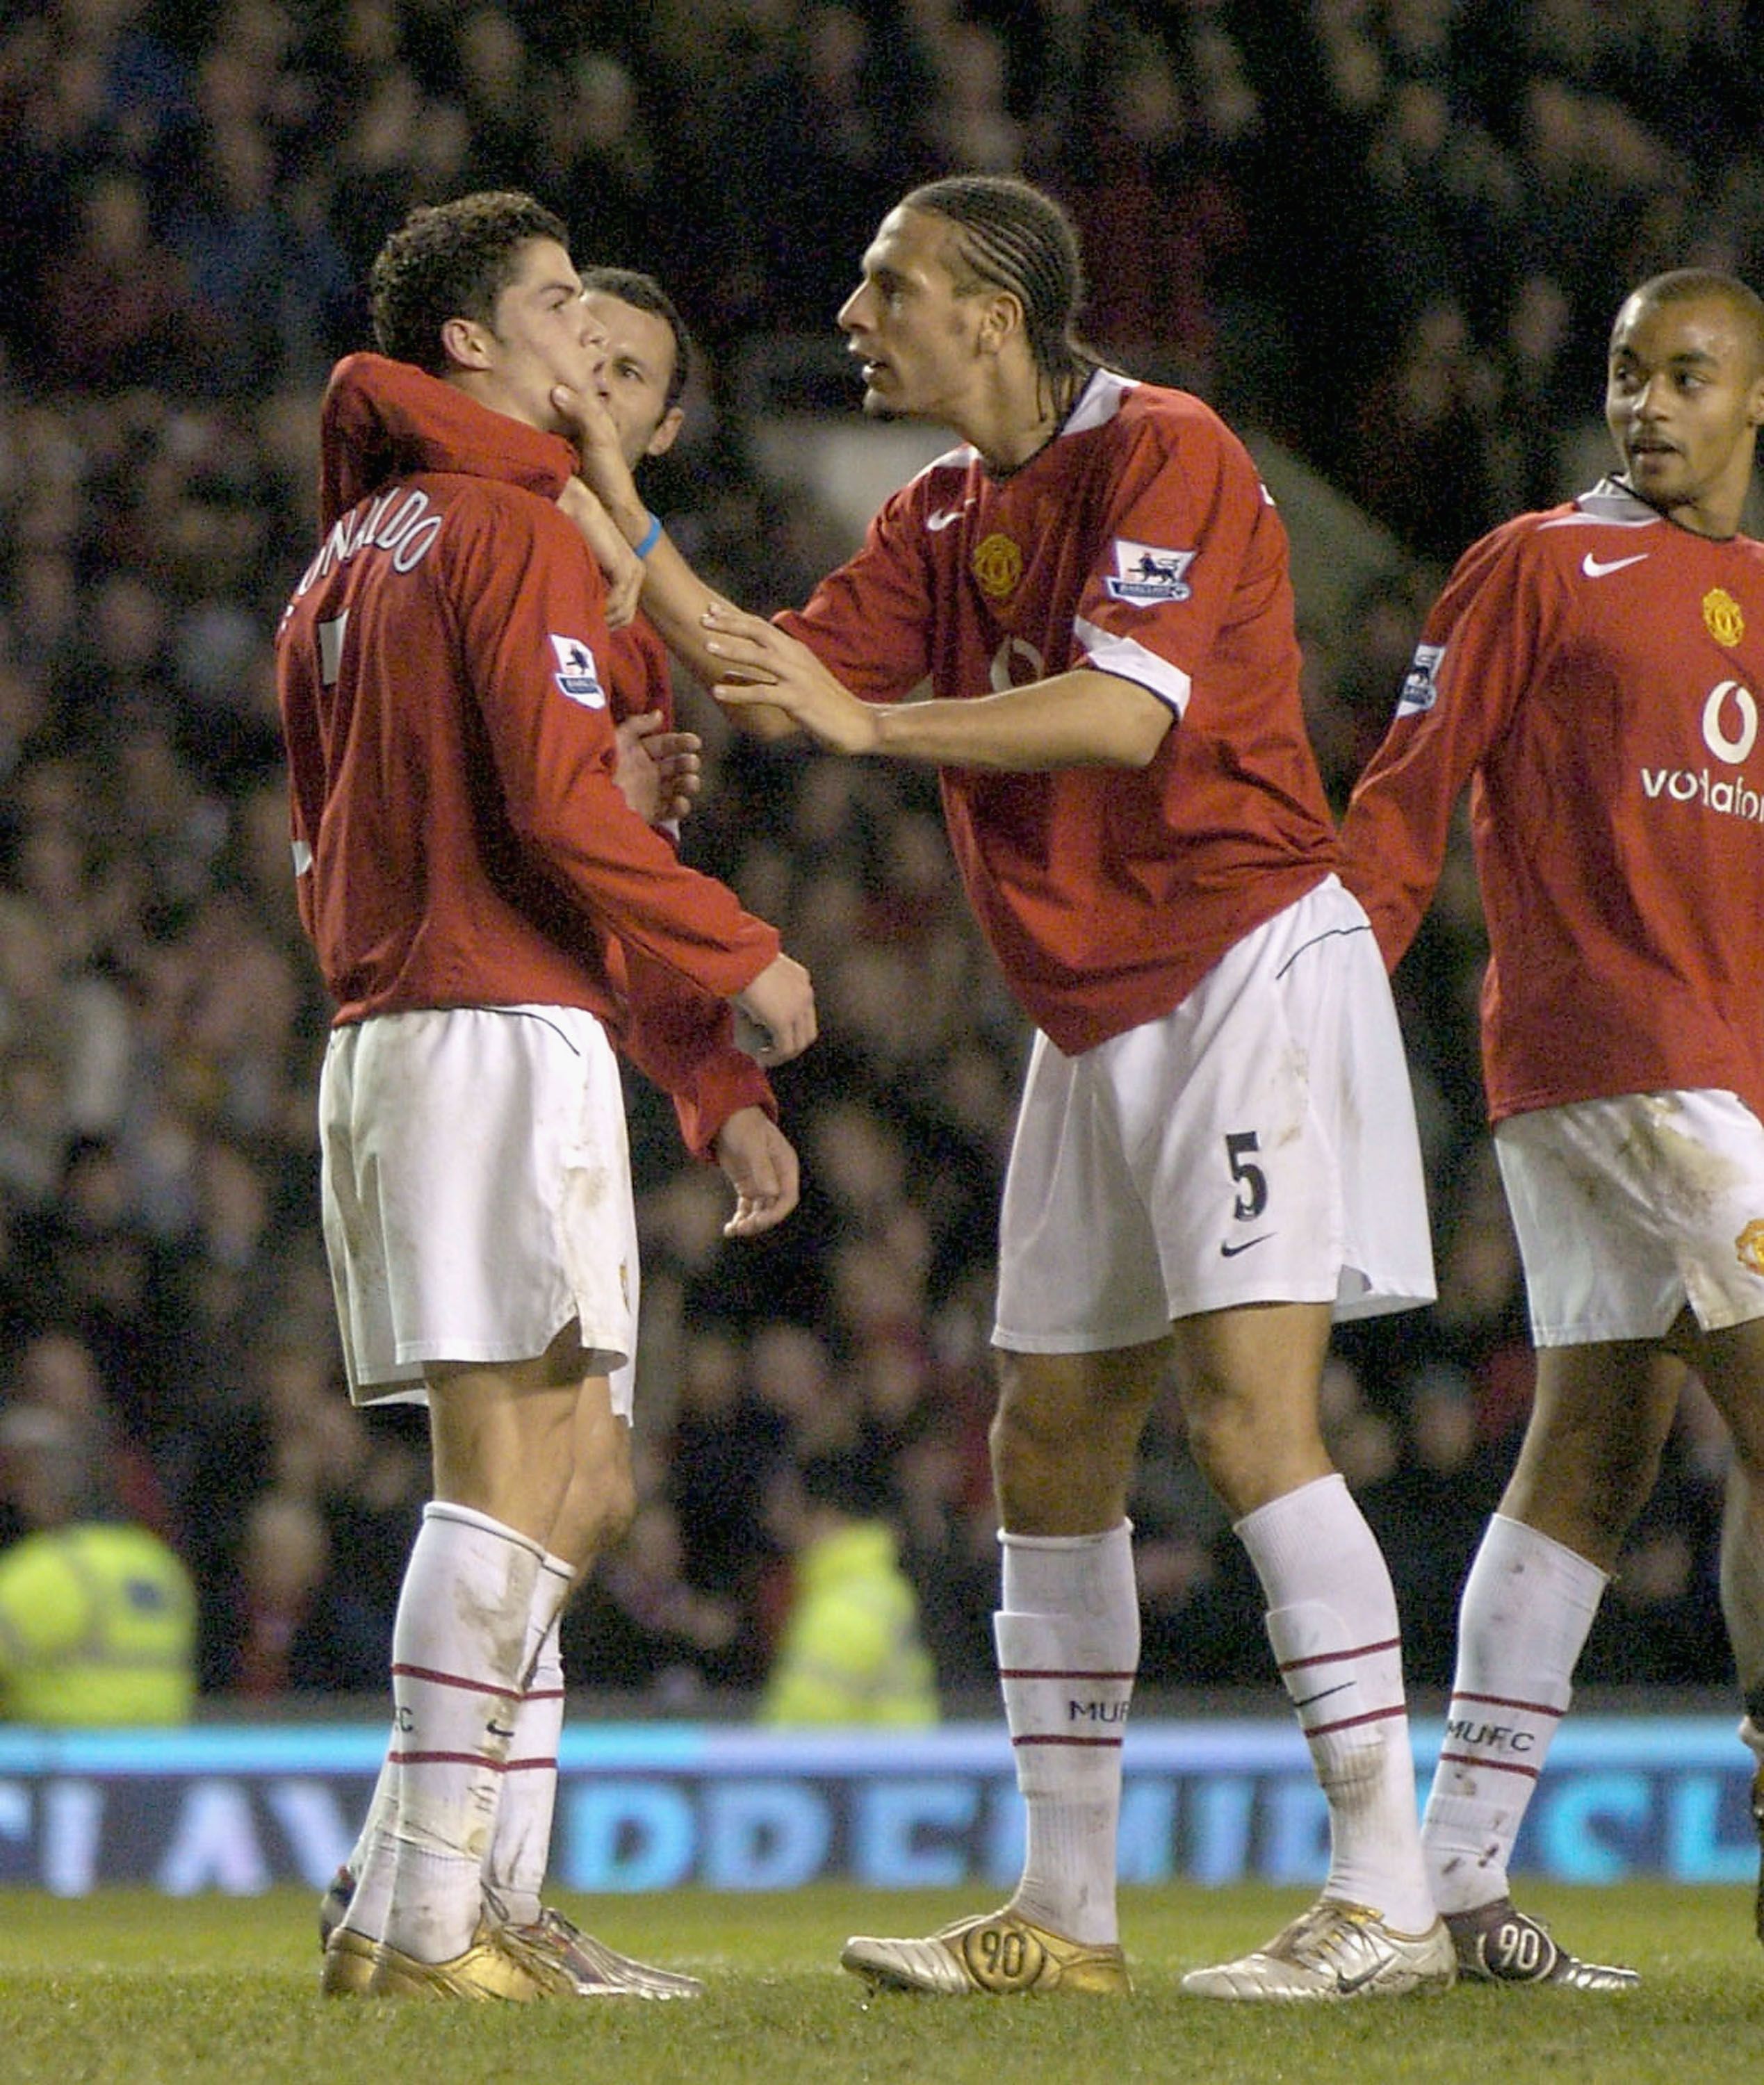 Footage of Roy Keane berating young Cristiano Ronaldo resurfaces as Man  United fans bemoan 'it's what we need now